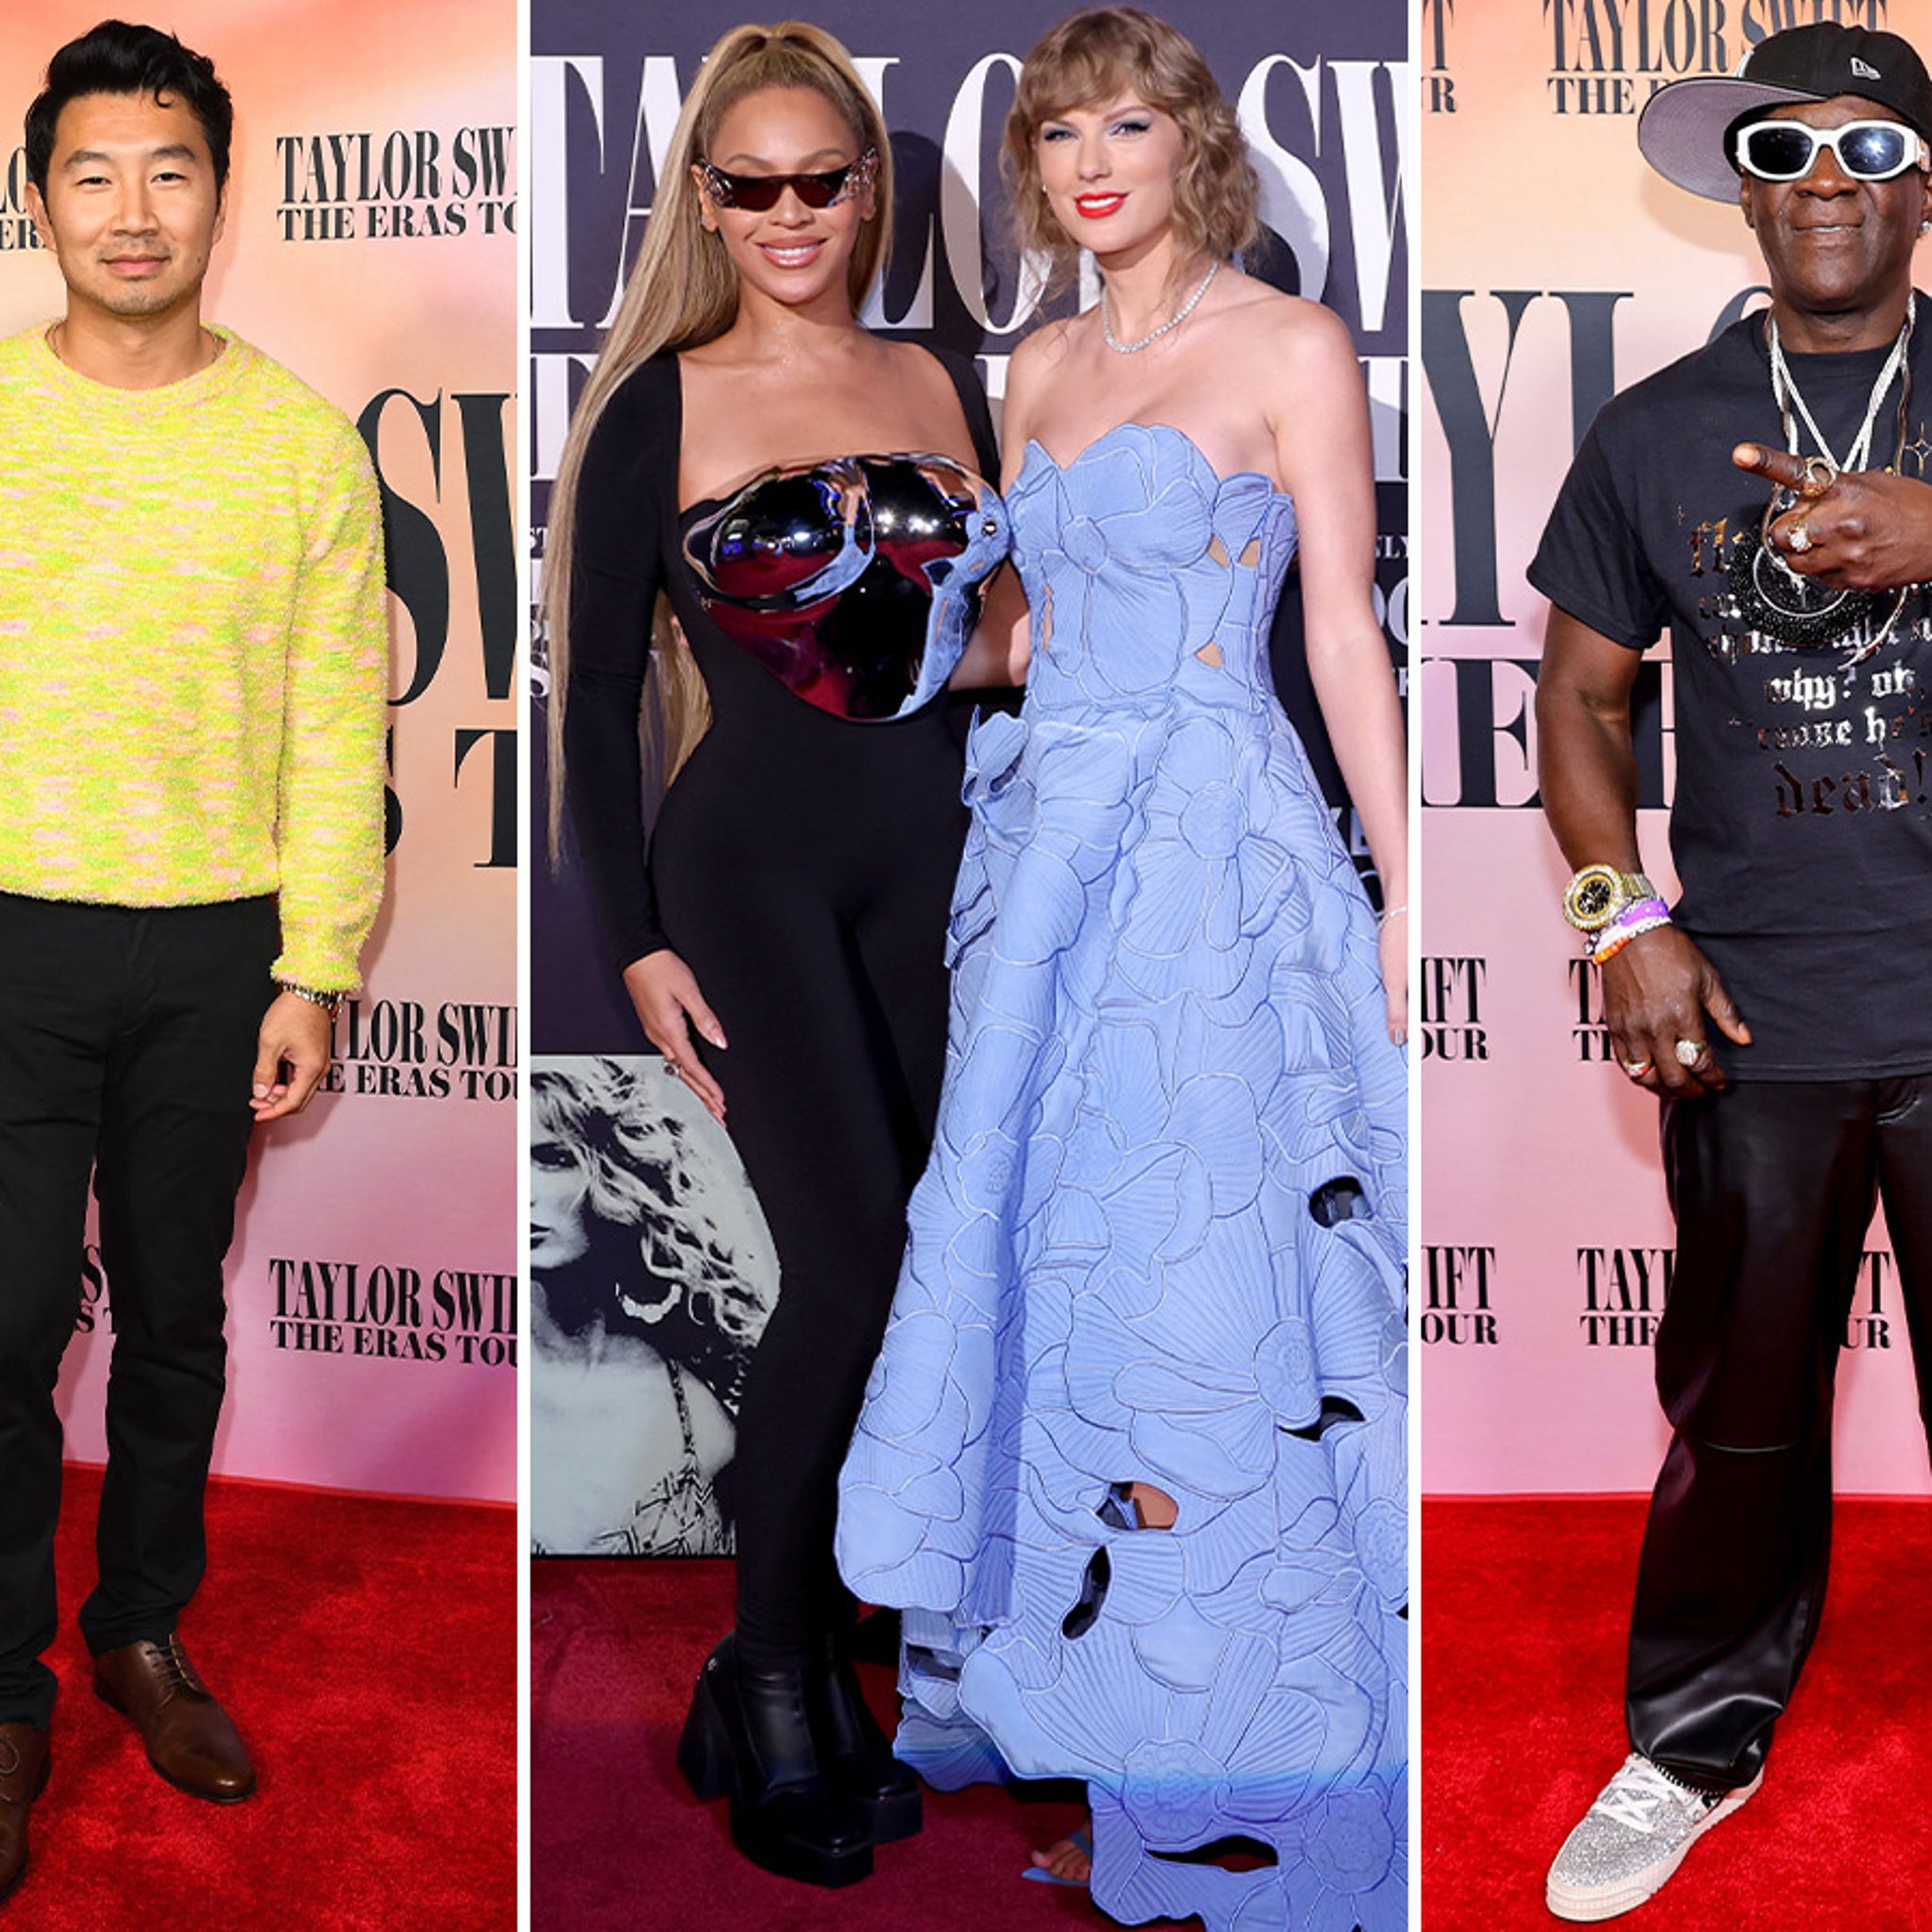 Taylor Swift Premiere Packed with Fans and Celebs Including Adam Sandler,  Beyoncé